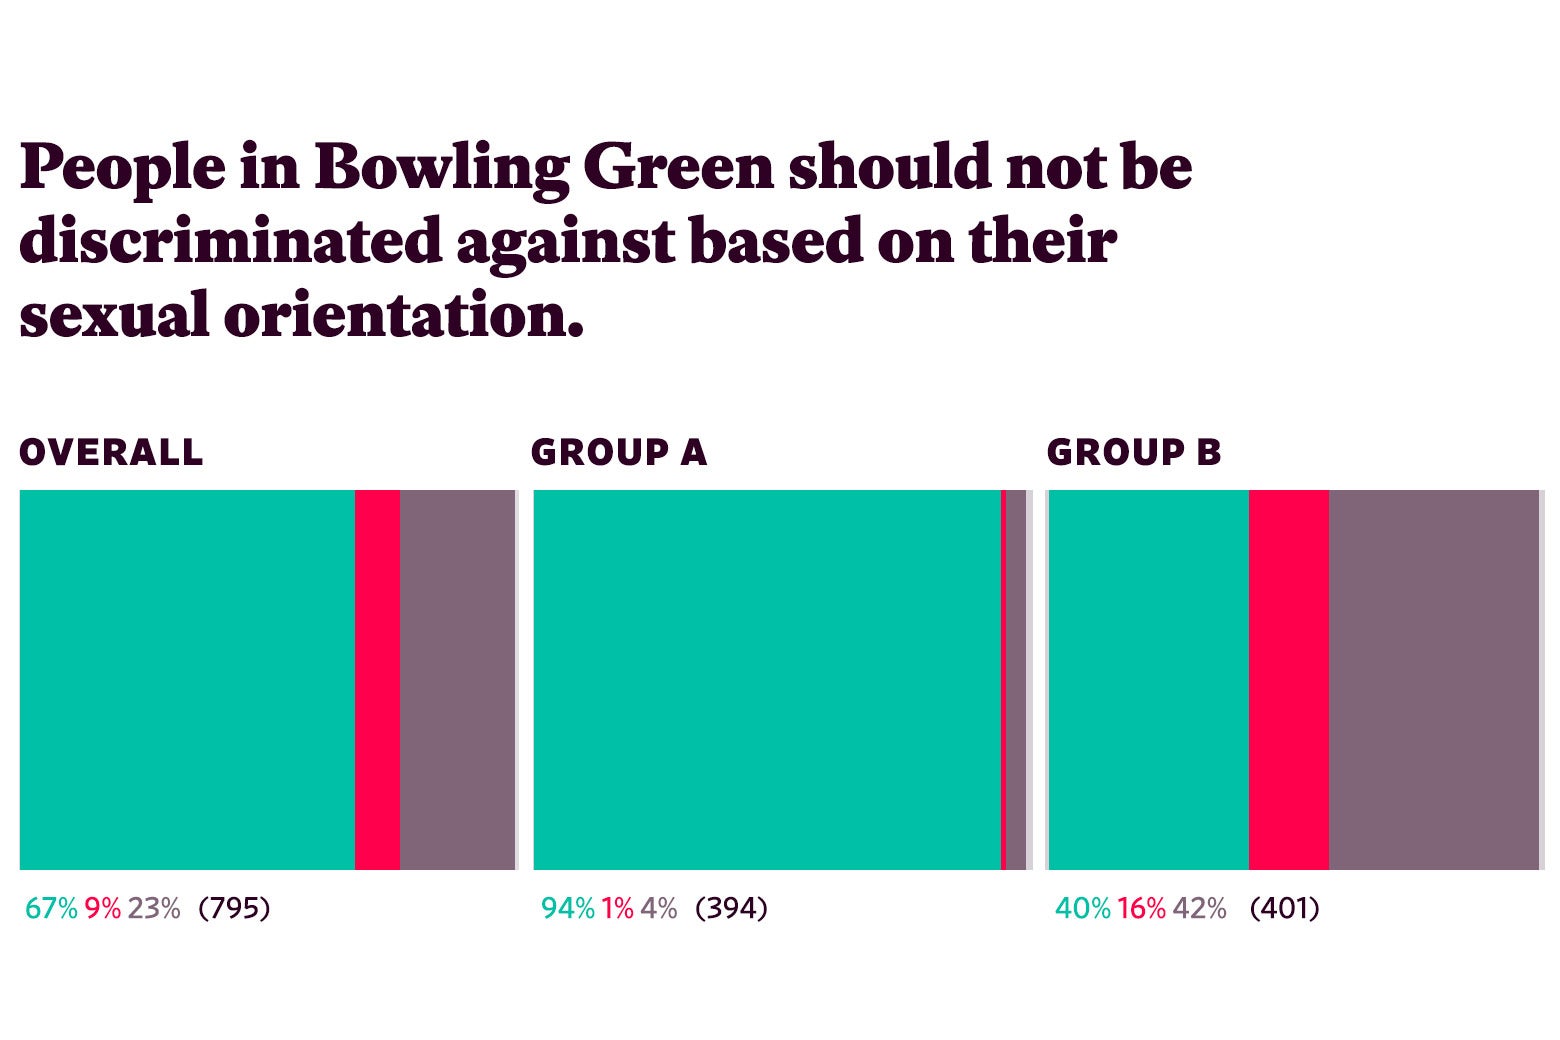 Responses to “People in Bowling Green should not be discriminated against based on their sexual orientation.”